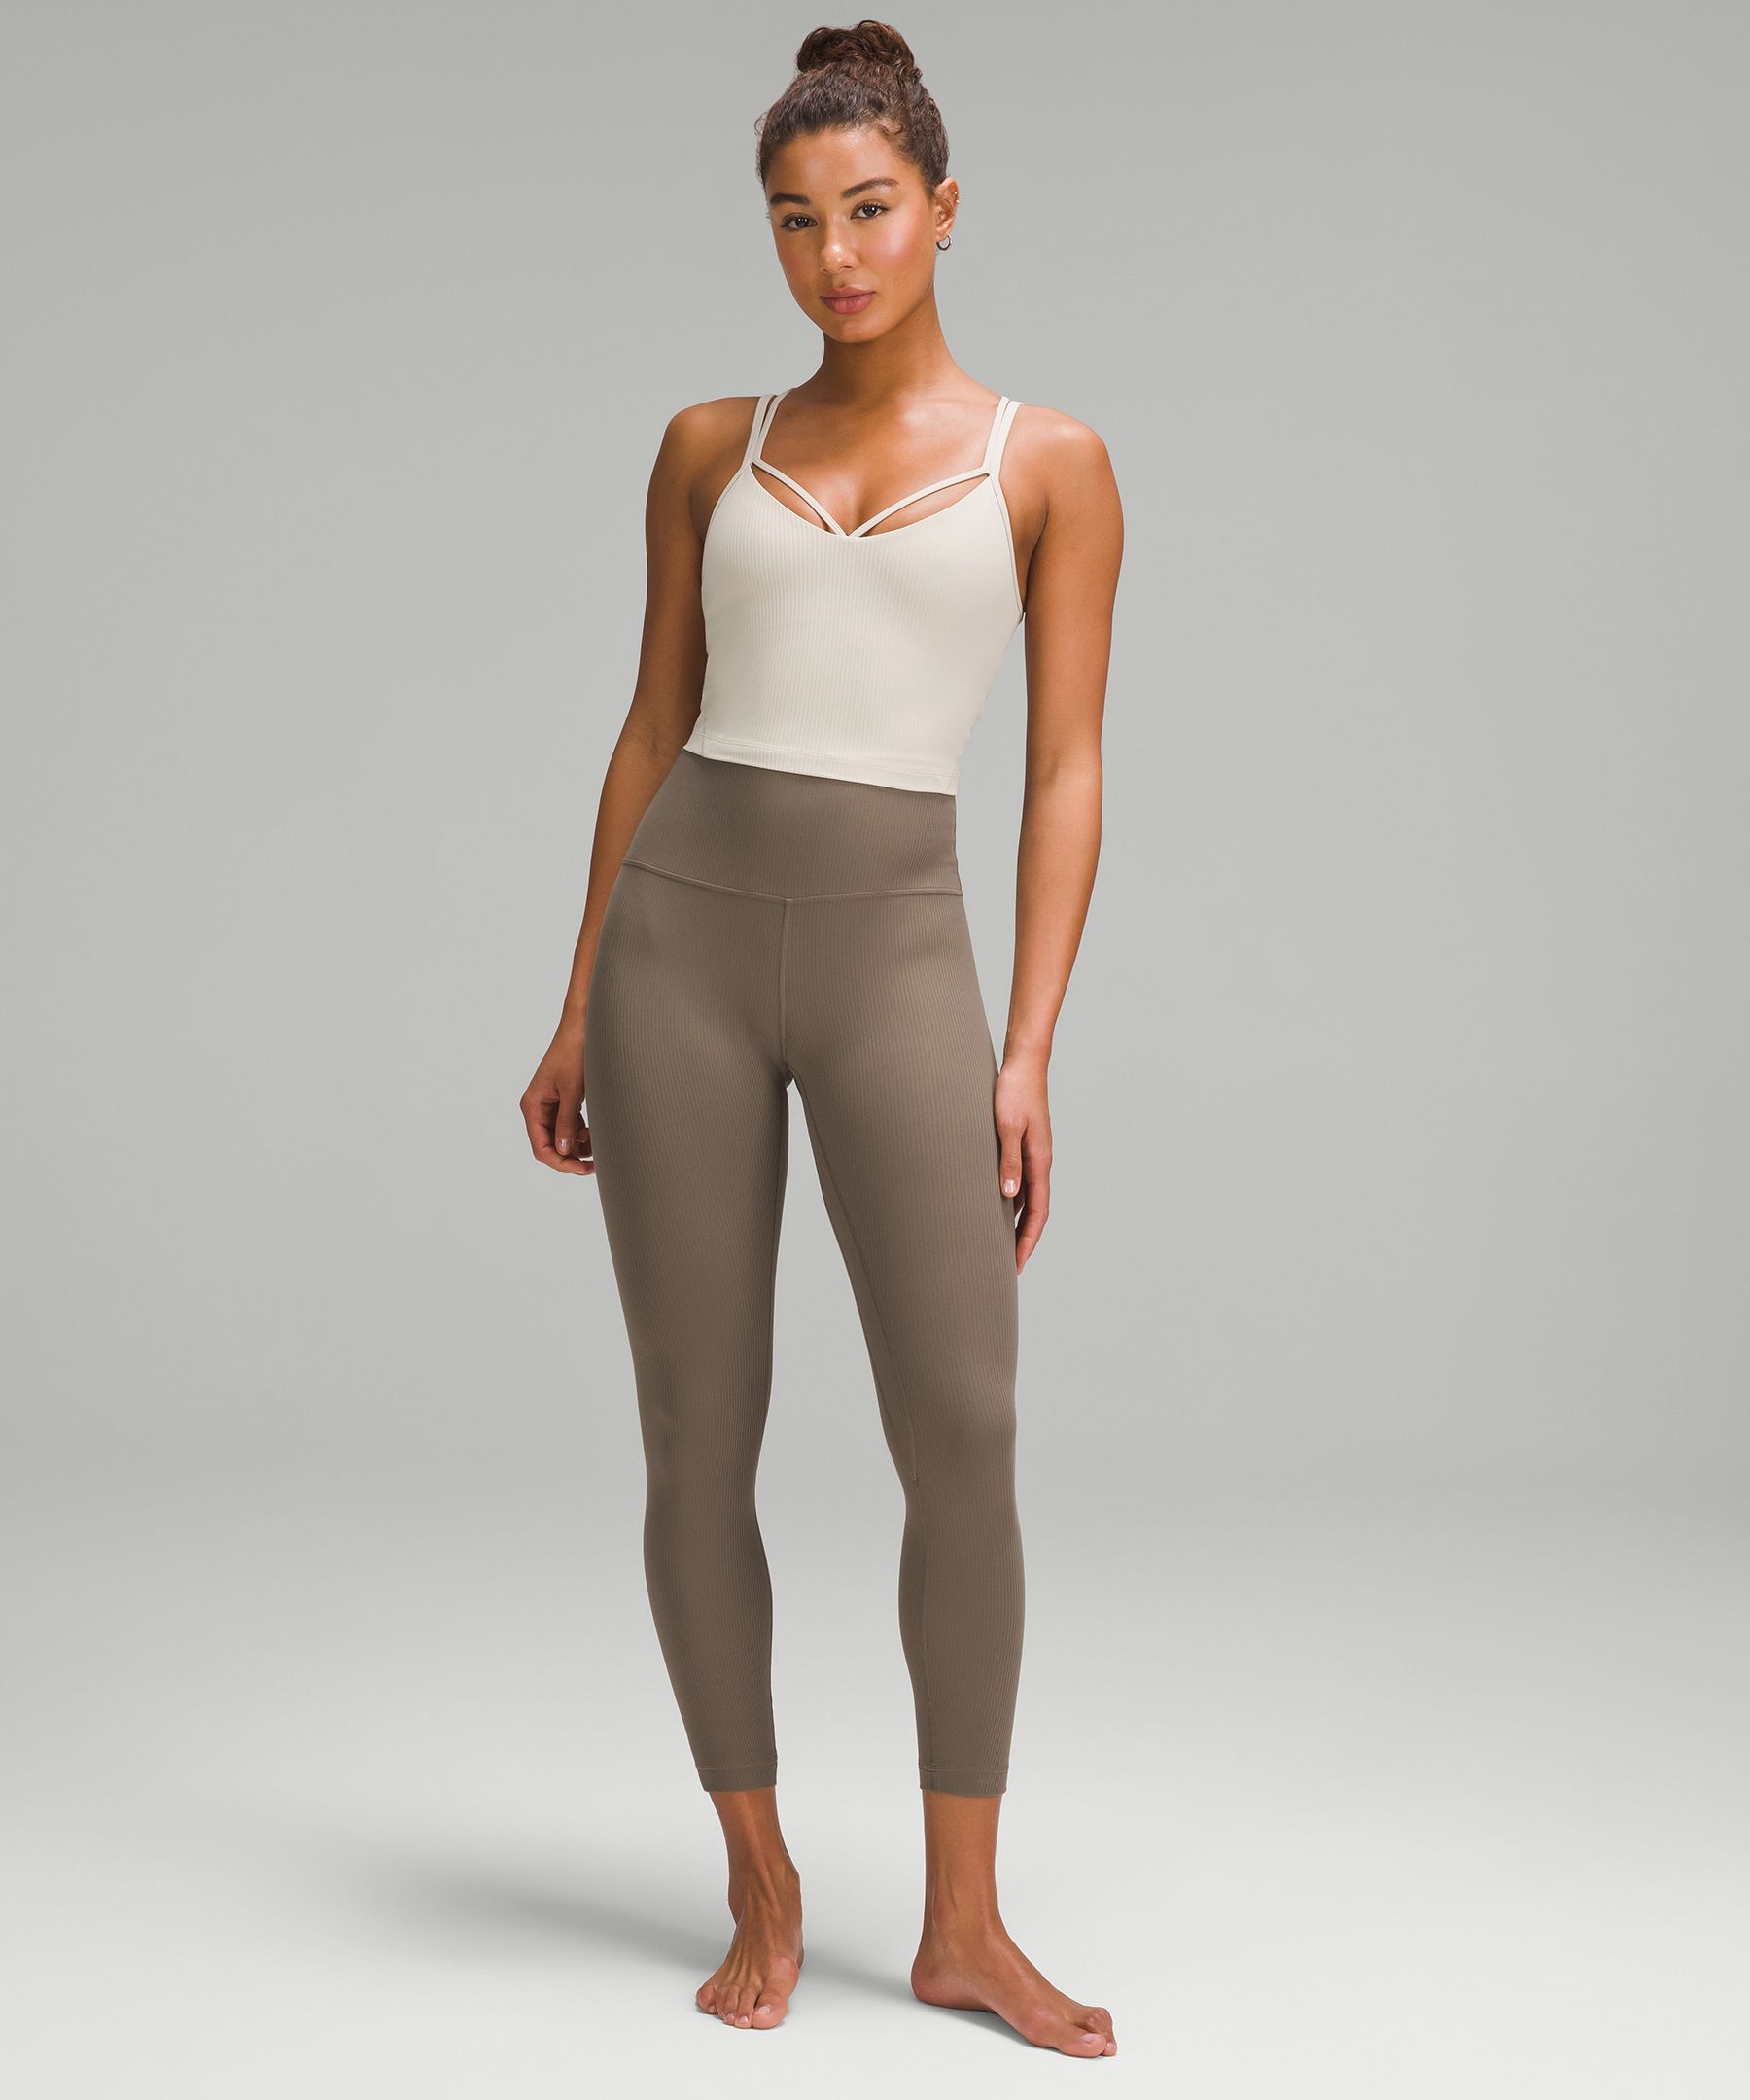 Lululemon Athletica Solid Brown Silver Leggings Size 14 - 57% off